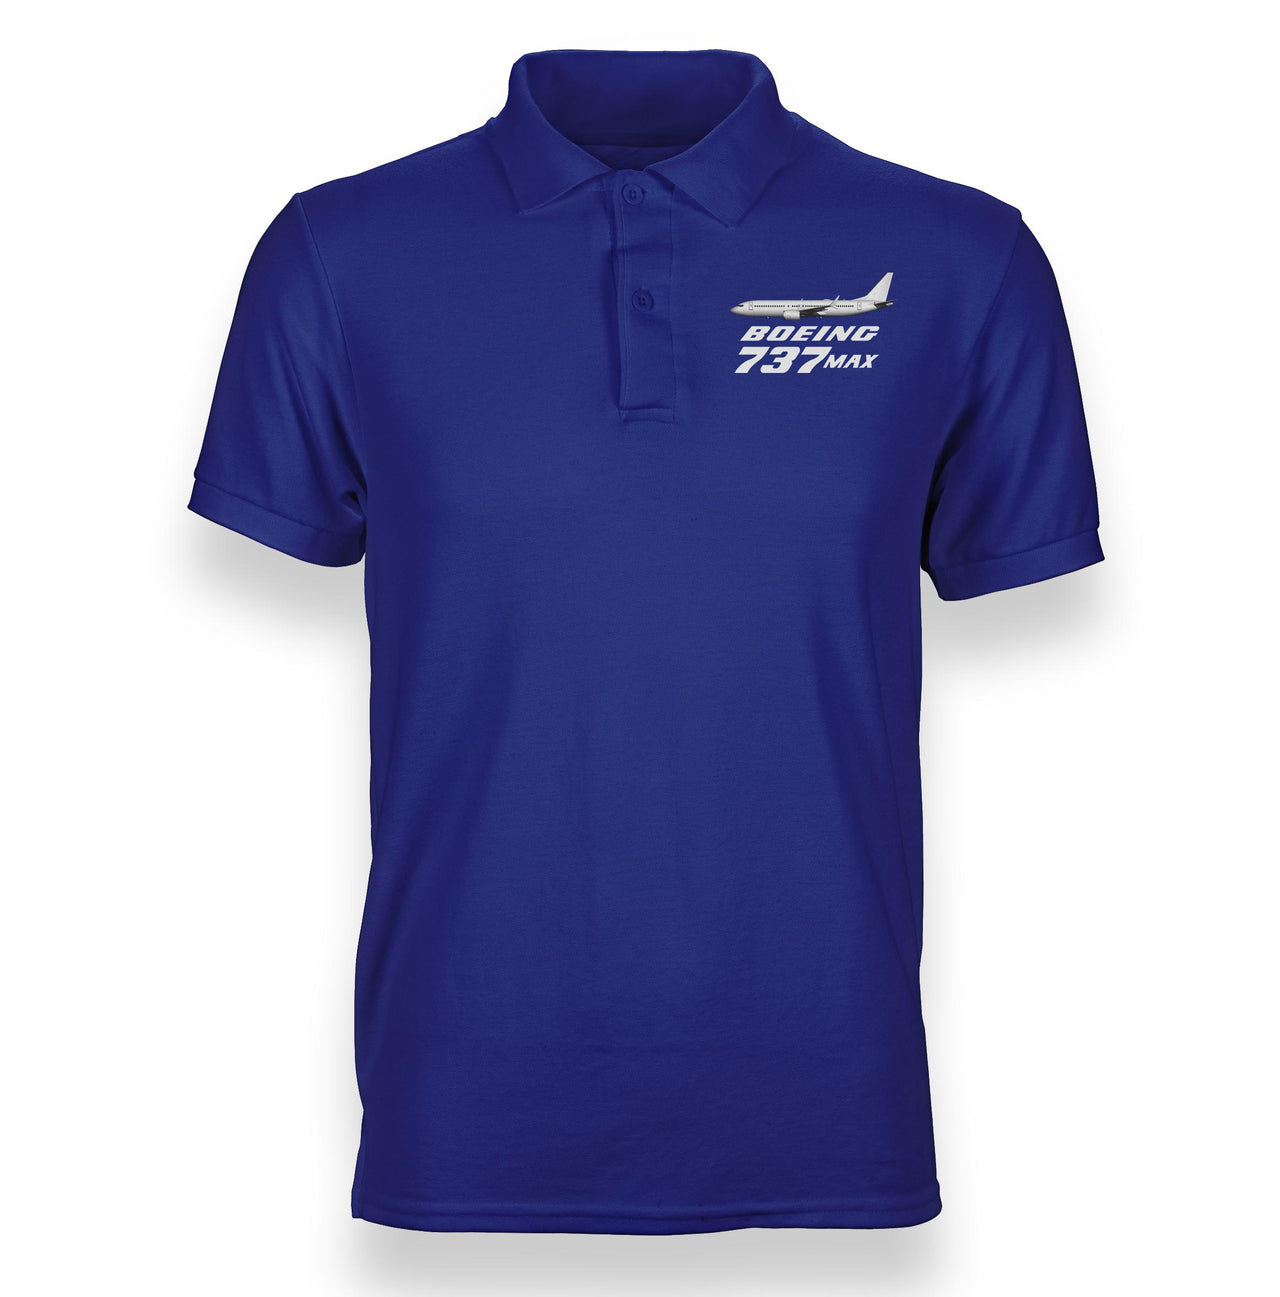 The Boeing 737Max Designed Polo T-Shirts